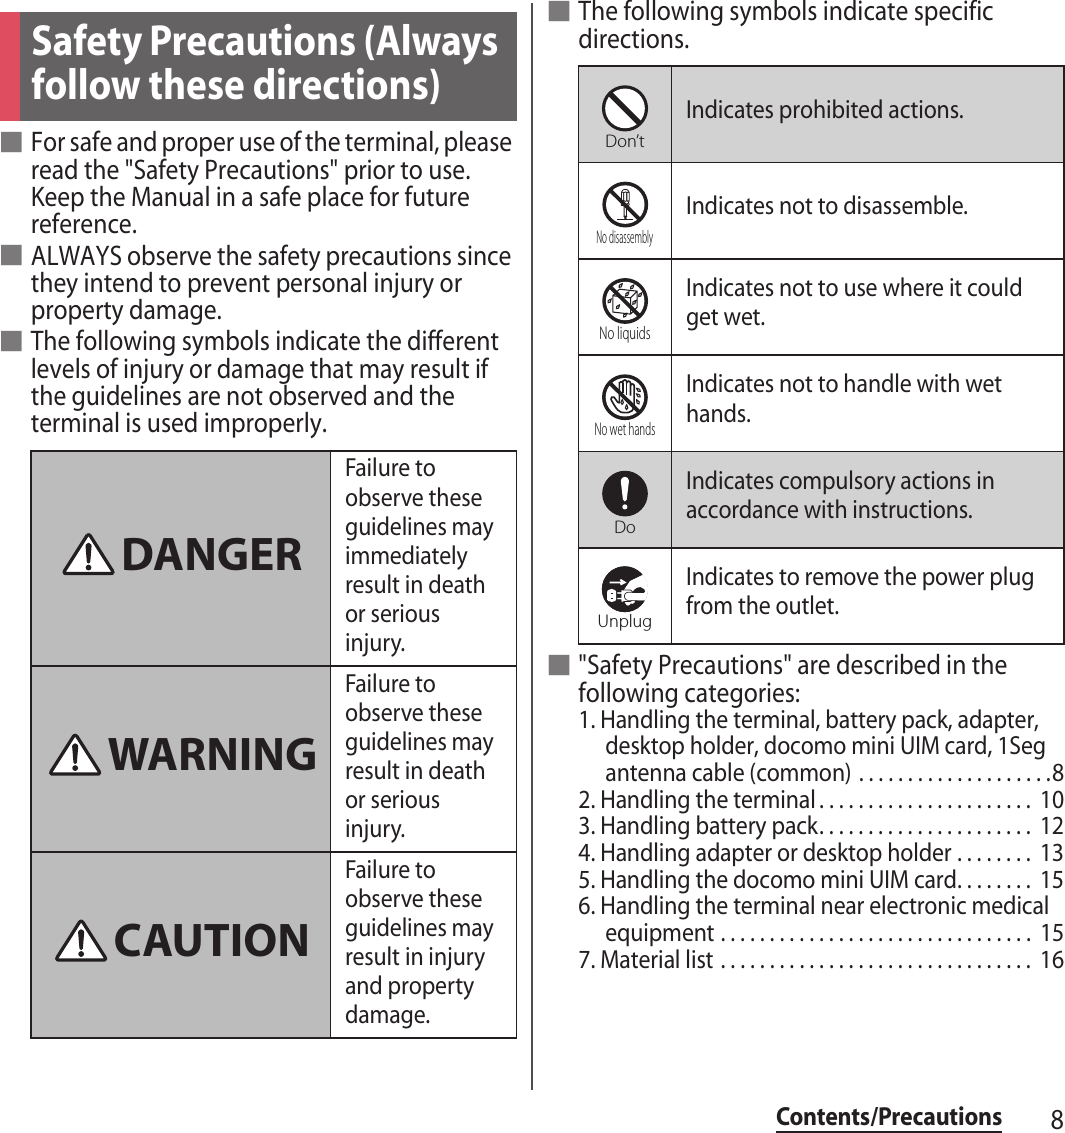 8Contents/Precautions■For safe and proper use of the terminal, please read the &quot;Safety Precautions&quot; prior to use. Keep the Manual in a safe place for future reference.■ALWAYS observe the safety precautions since they intend to prevent personal injury or property damage.■The following symbols indicate the different levels of injury or damage that may result if the guidelines are not observed and the terminal is used improperly.■The following symbols indicate specific directions.■&quot;Safety Precautions&quot; are described in the following categories:1. Handling the terminal, battery pack, adapter, desktop holder, docomo mini UIM card, 1Seg antenna cable (common) . . . . . . . . . . . . . . . . . . . .82. Handling the terminal . . . . . . . . . . . . . . . . . . . . . .  103. Handling battery pack. . . . . . . . . . . . . . . . . . . . . .  124. Handling adapter or desktop holder . . . . . . . .  135. Handling the docomo mini UIM card. . . . . . . .  156. Handling the terminal near electronic medical equipment . . . . . . . . . . . . . . . . . . . . . . . . . . . . . . . .  157. Material list . . . . . . . . . . . . . . . . . . . . . . . . . . . . . . . .  16Safety Precautions (Always follow these directions)Failure to observe these guidelines may immediately result in death or serious injury.Failure to observe these guidelines may result in death or serious injury.Failure to observe these guidelines may result in injury and property damage.DANGERWARNINGCAUTIONIndicates prohibited actions.Indicates not to disassemble.Indicates not to use where it could get wet.Indicates not to handle with wet hands.Indicates compulsory actions in accordance with instructions.Indicates to remove the power plug from the outlet.Don’tNo disassemblyNo liquidsNo wet handsDoUnplug